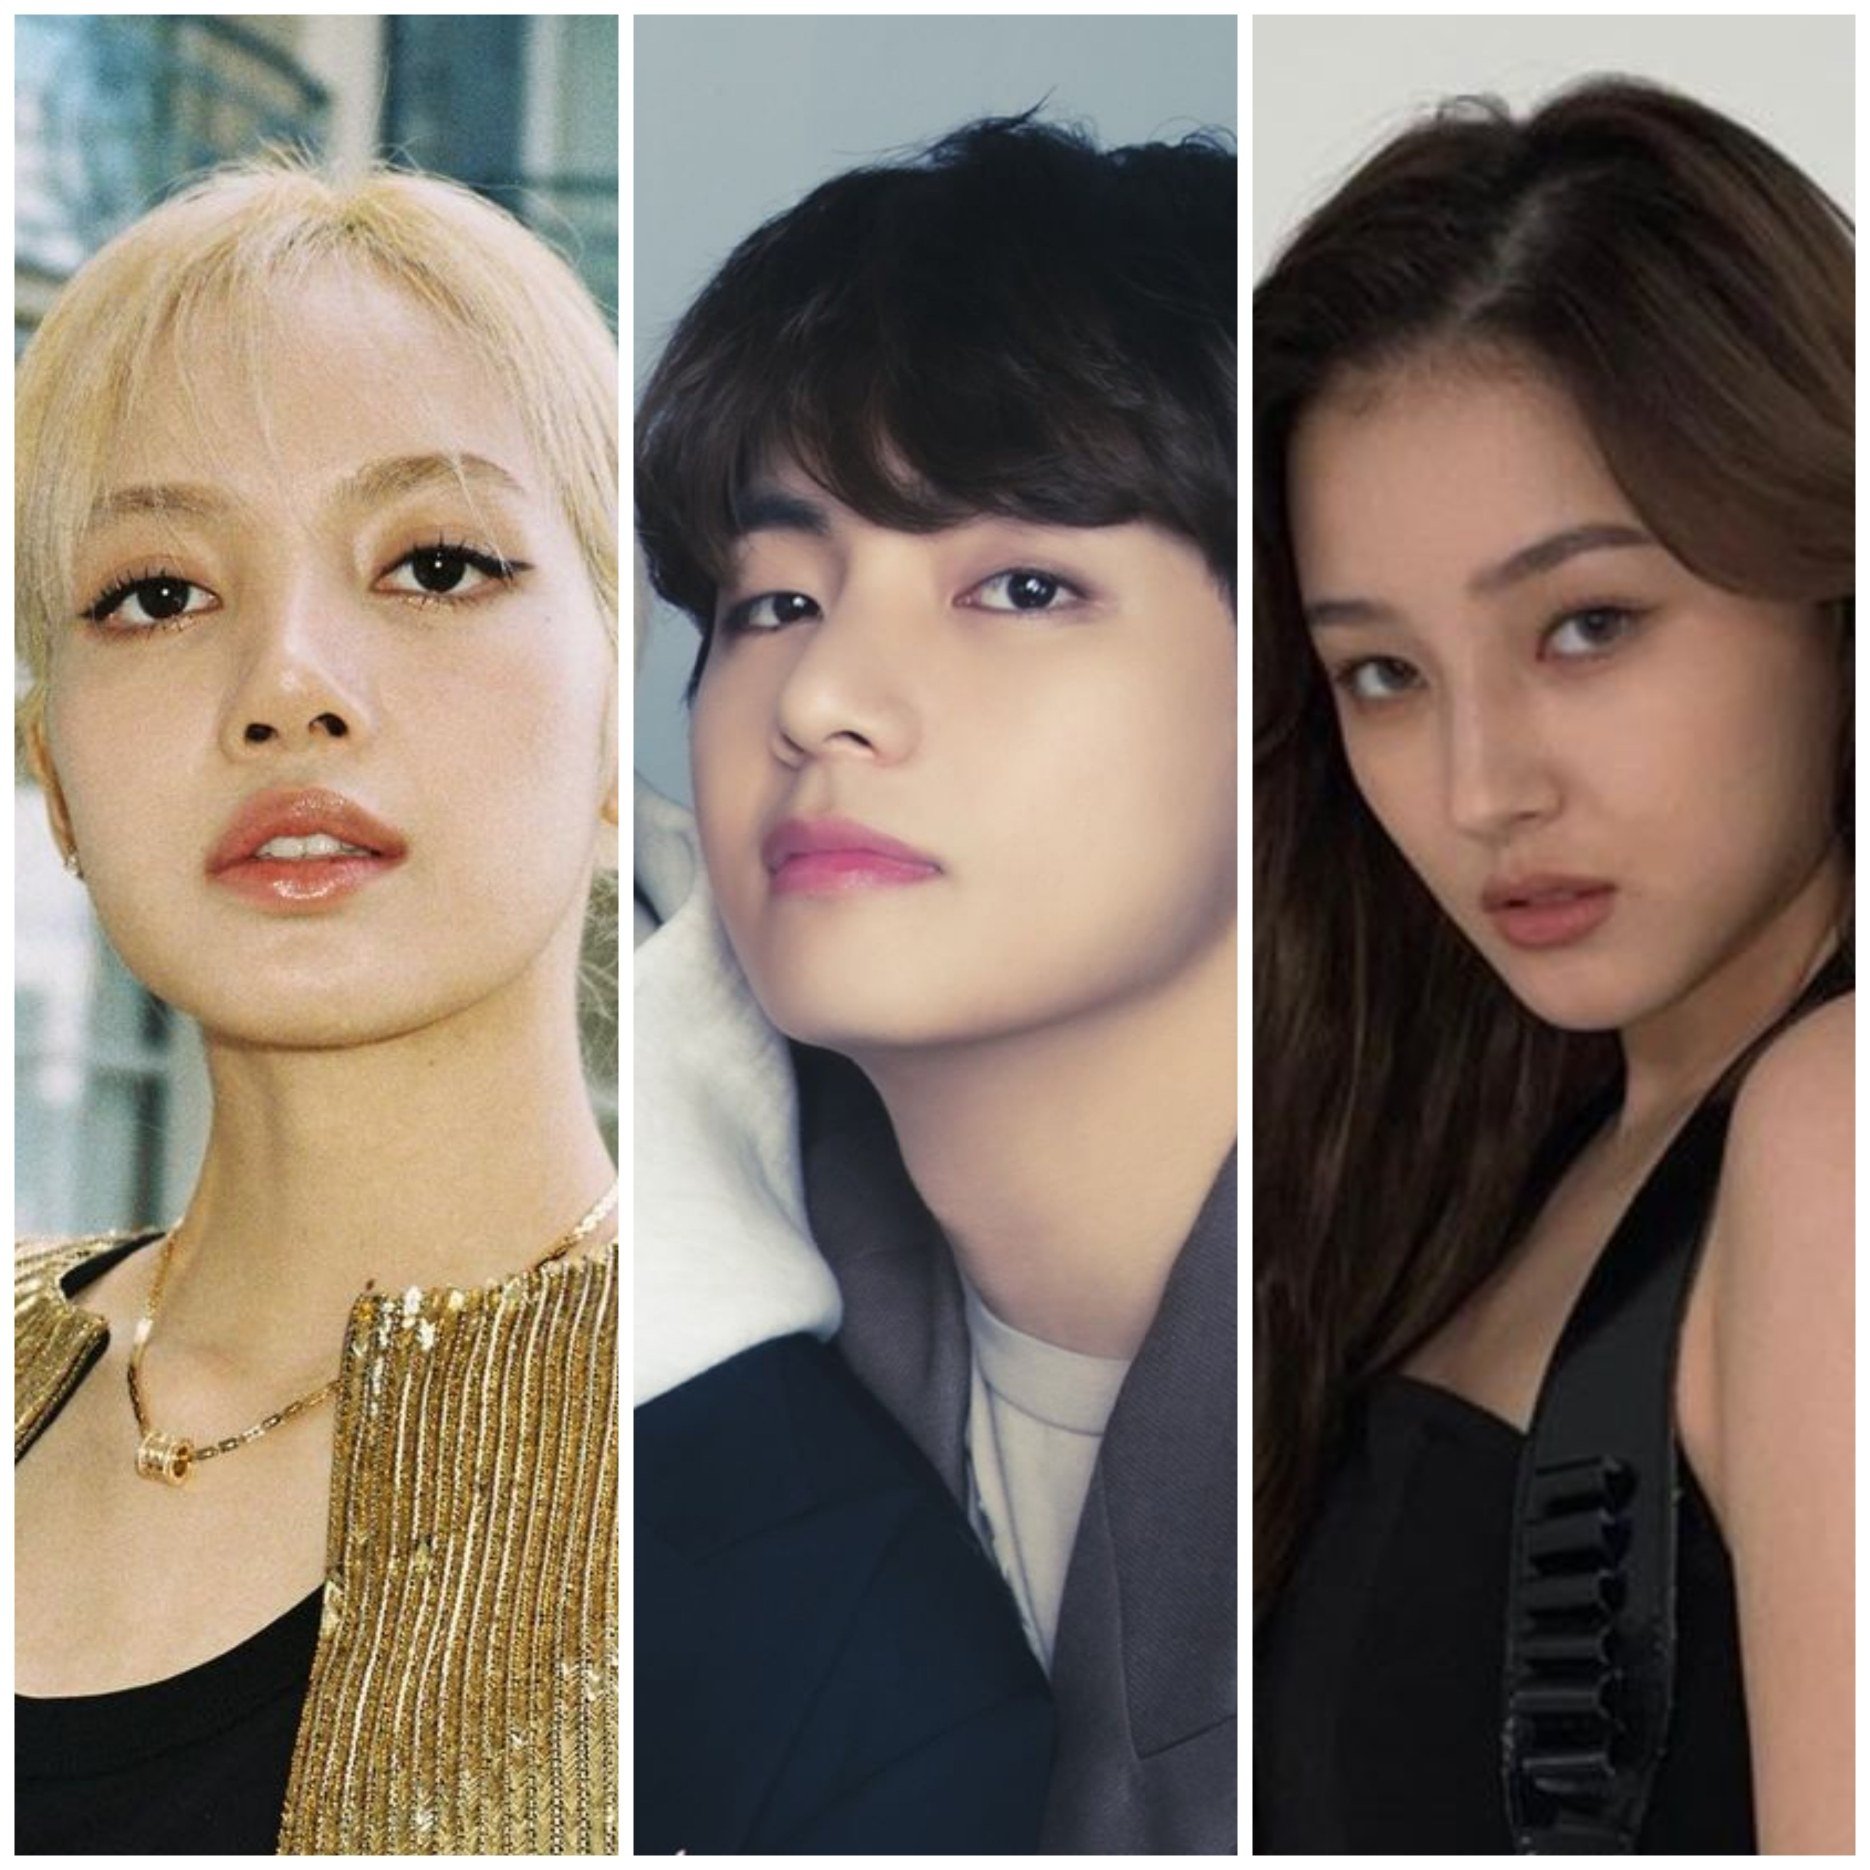 5 times K-pop idols were swindled or betrayed by agency staff: BTS and  Seventeen had their personal info leaked, Blackpink's Lisa had money  stolen, and Momoland's Nancy was filmed undressing | South